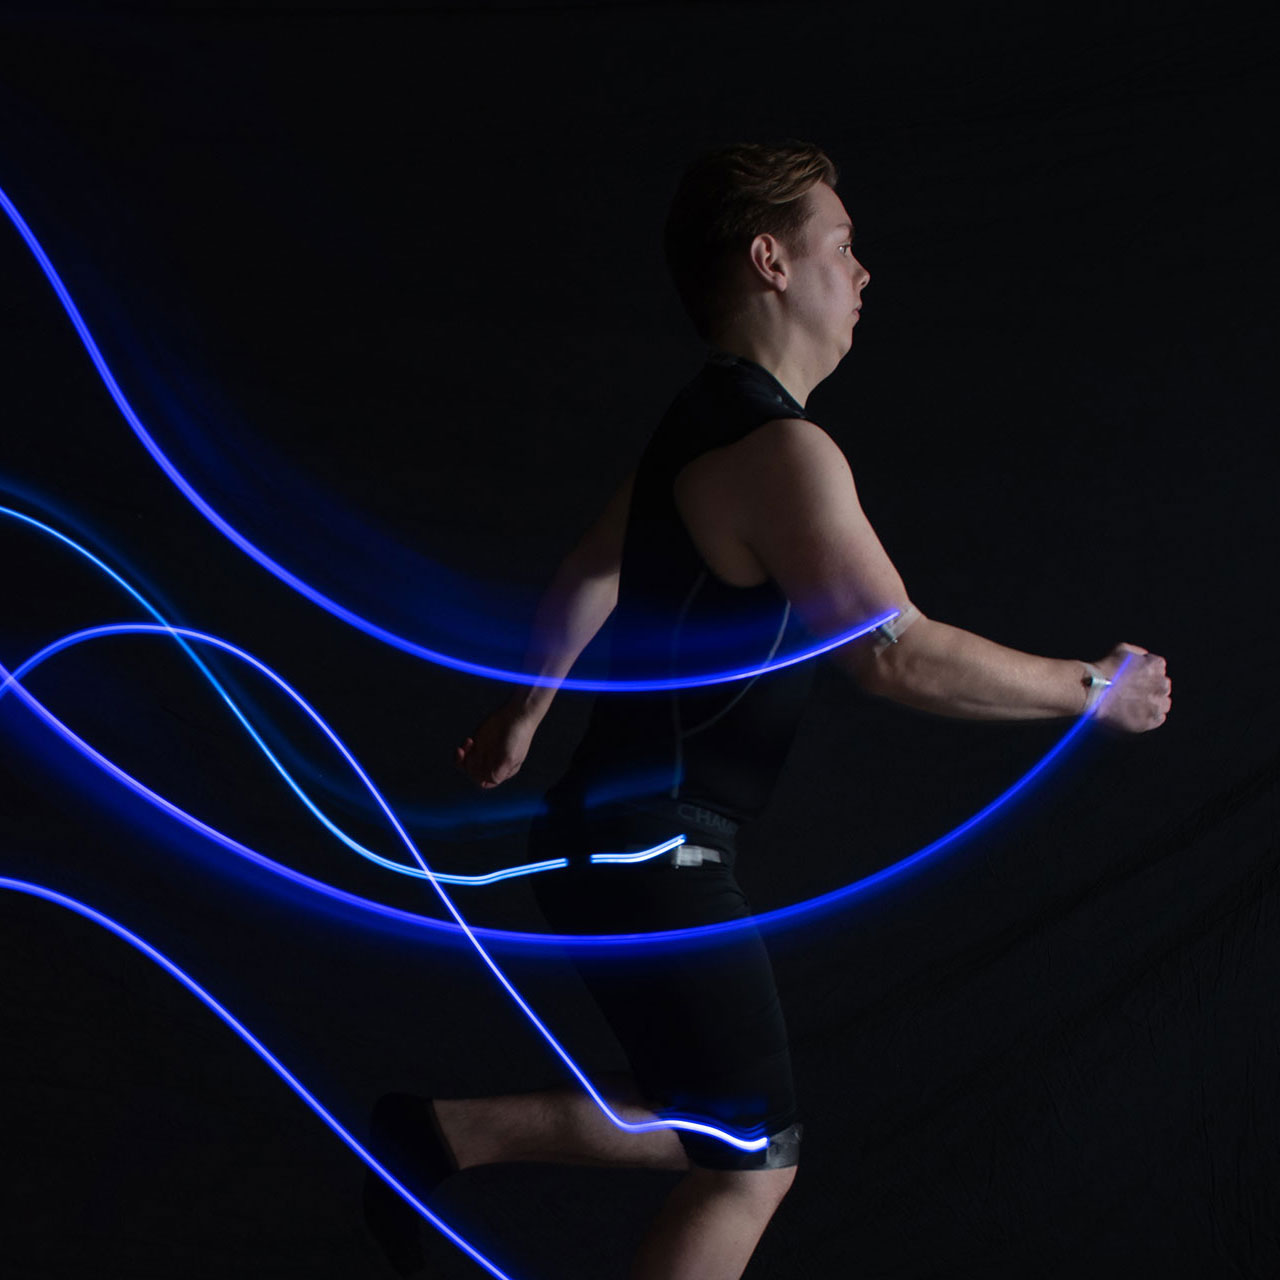 Woman with light sensors on her arm and wrist to measure movement.